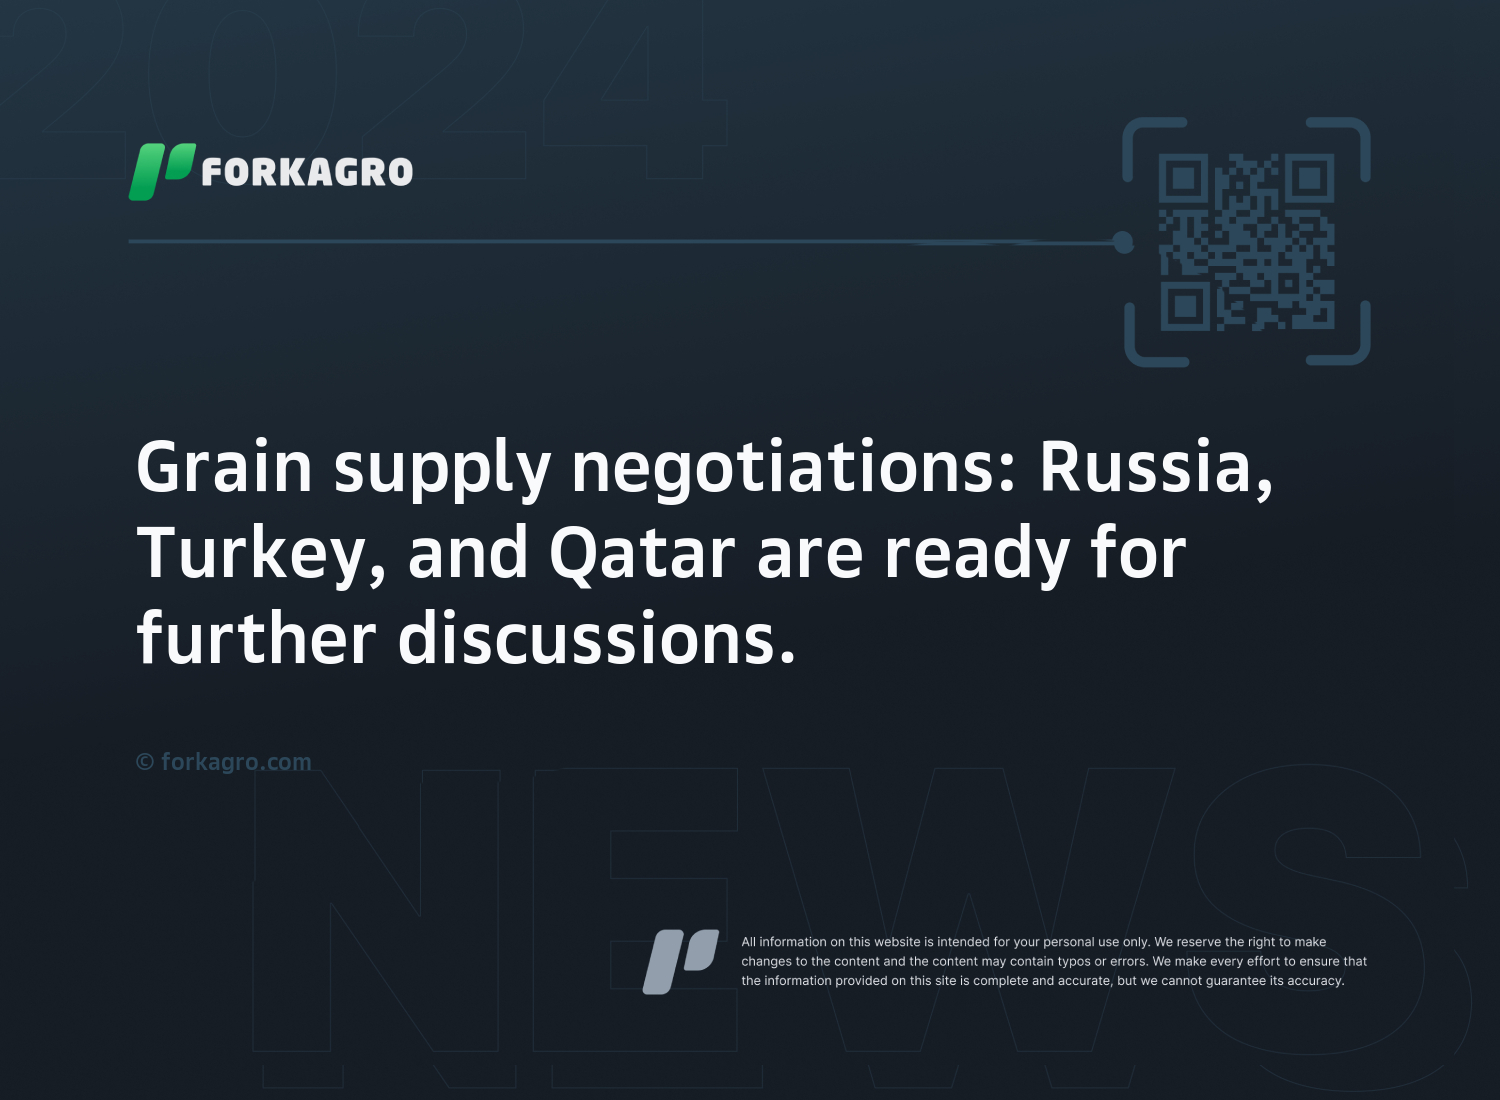 Grain supply negotiations: Russia, Turkey, and Qatar are ready for further discussions.